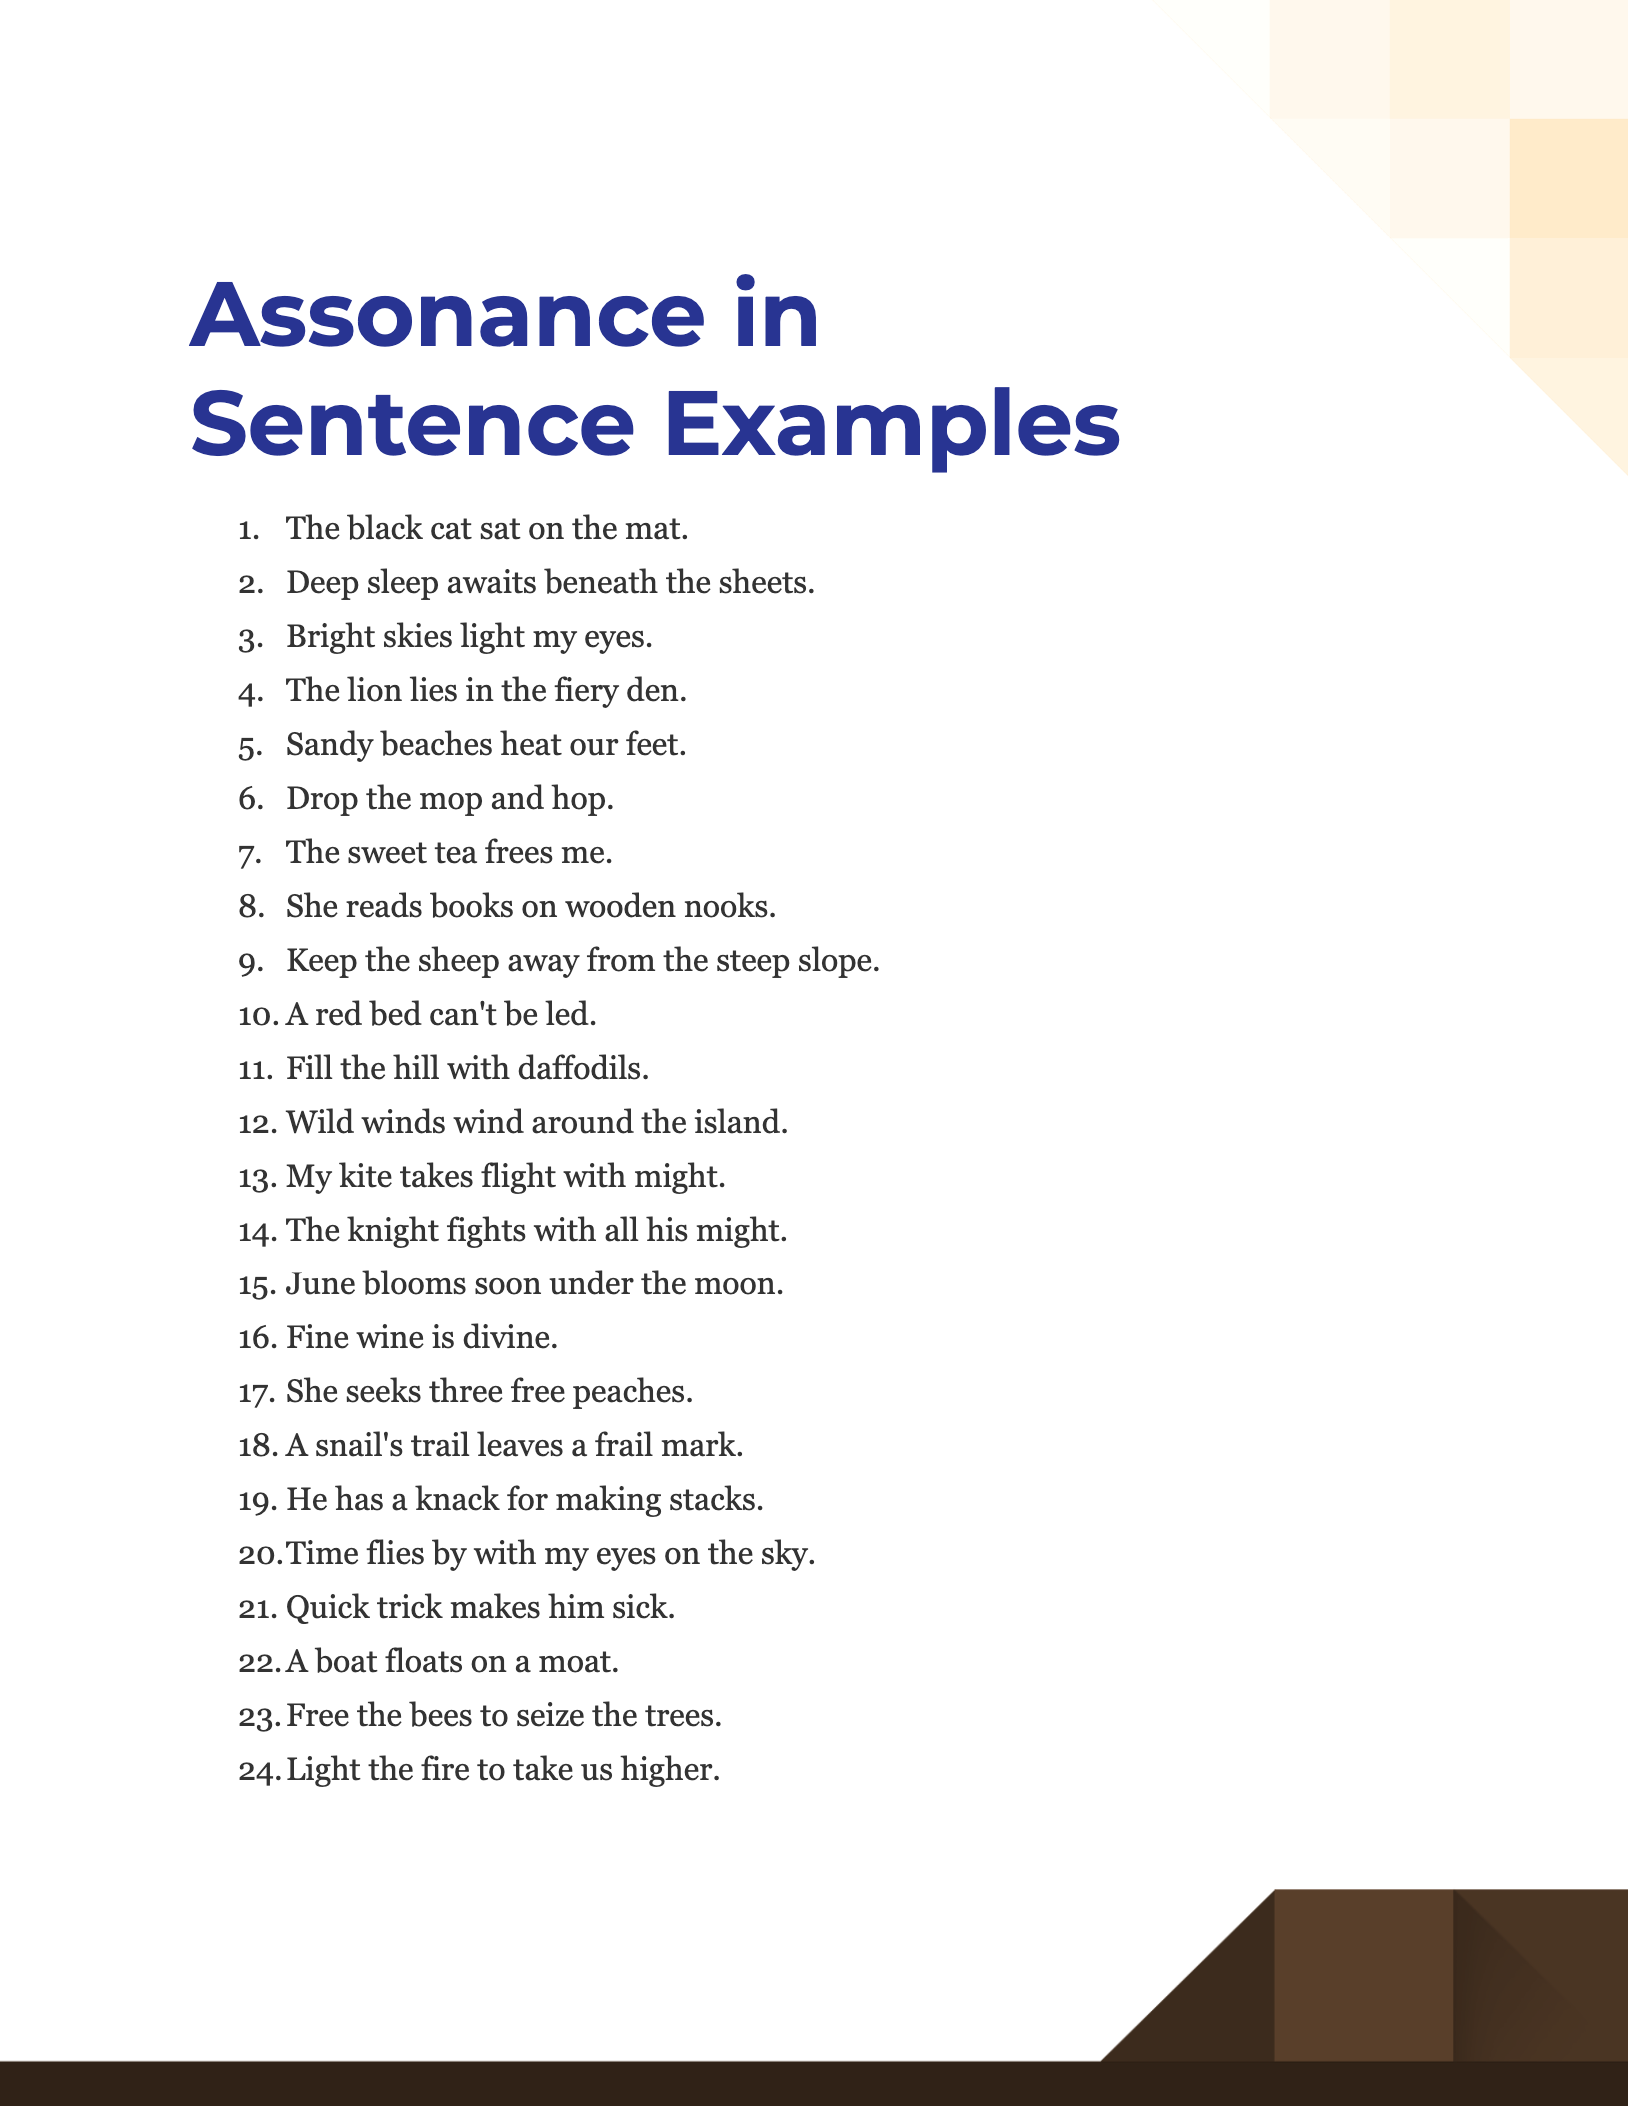 Assonance in Sentence Examples